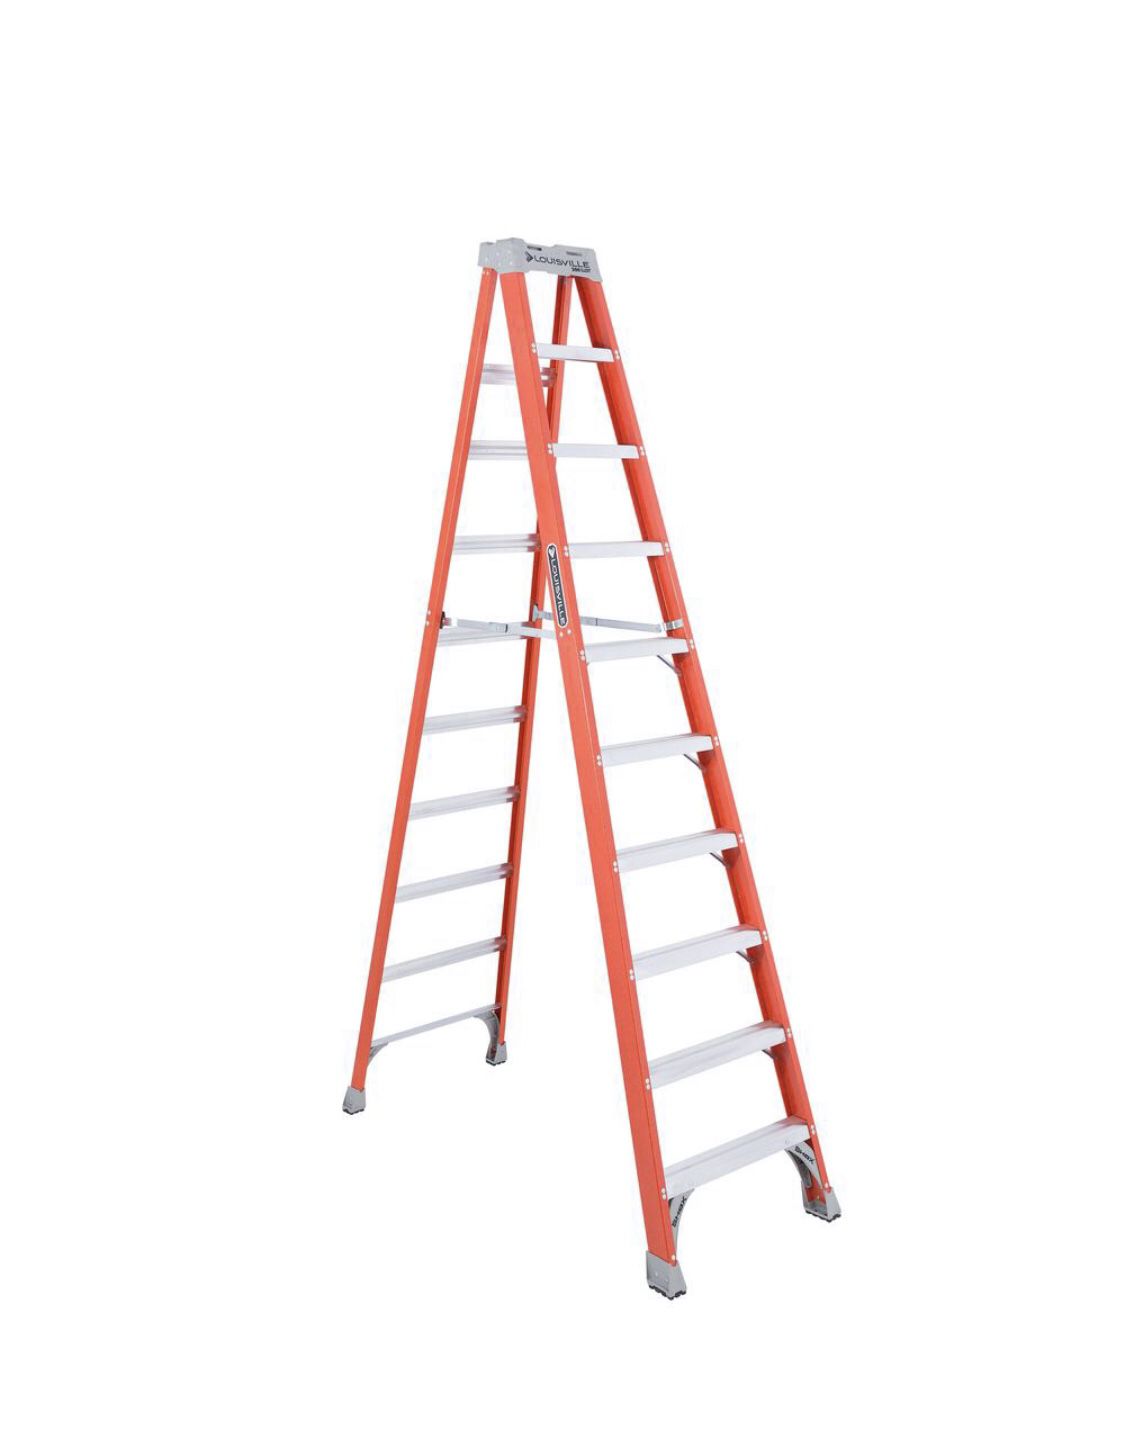 Louisville Ladder 10 ft. Fiberglass Step Ladder with 300 lbs. Load Capacity Type IA Duty Rating